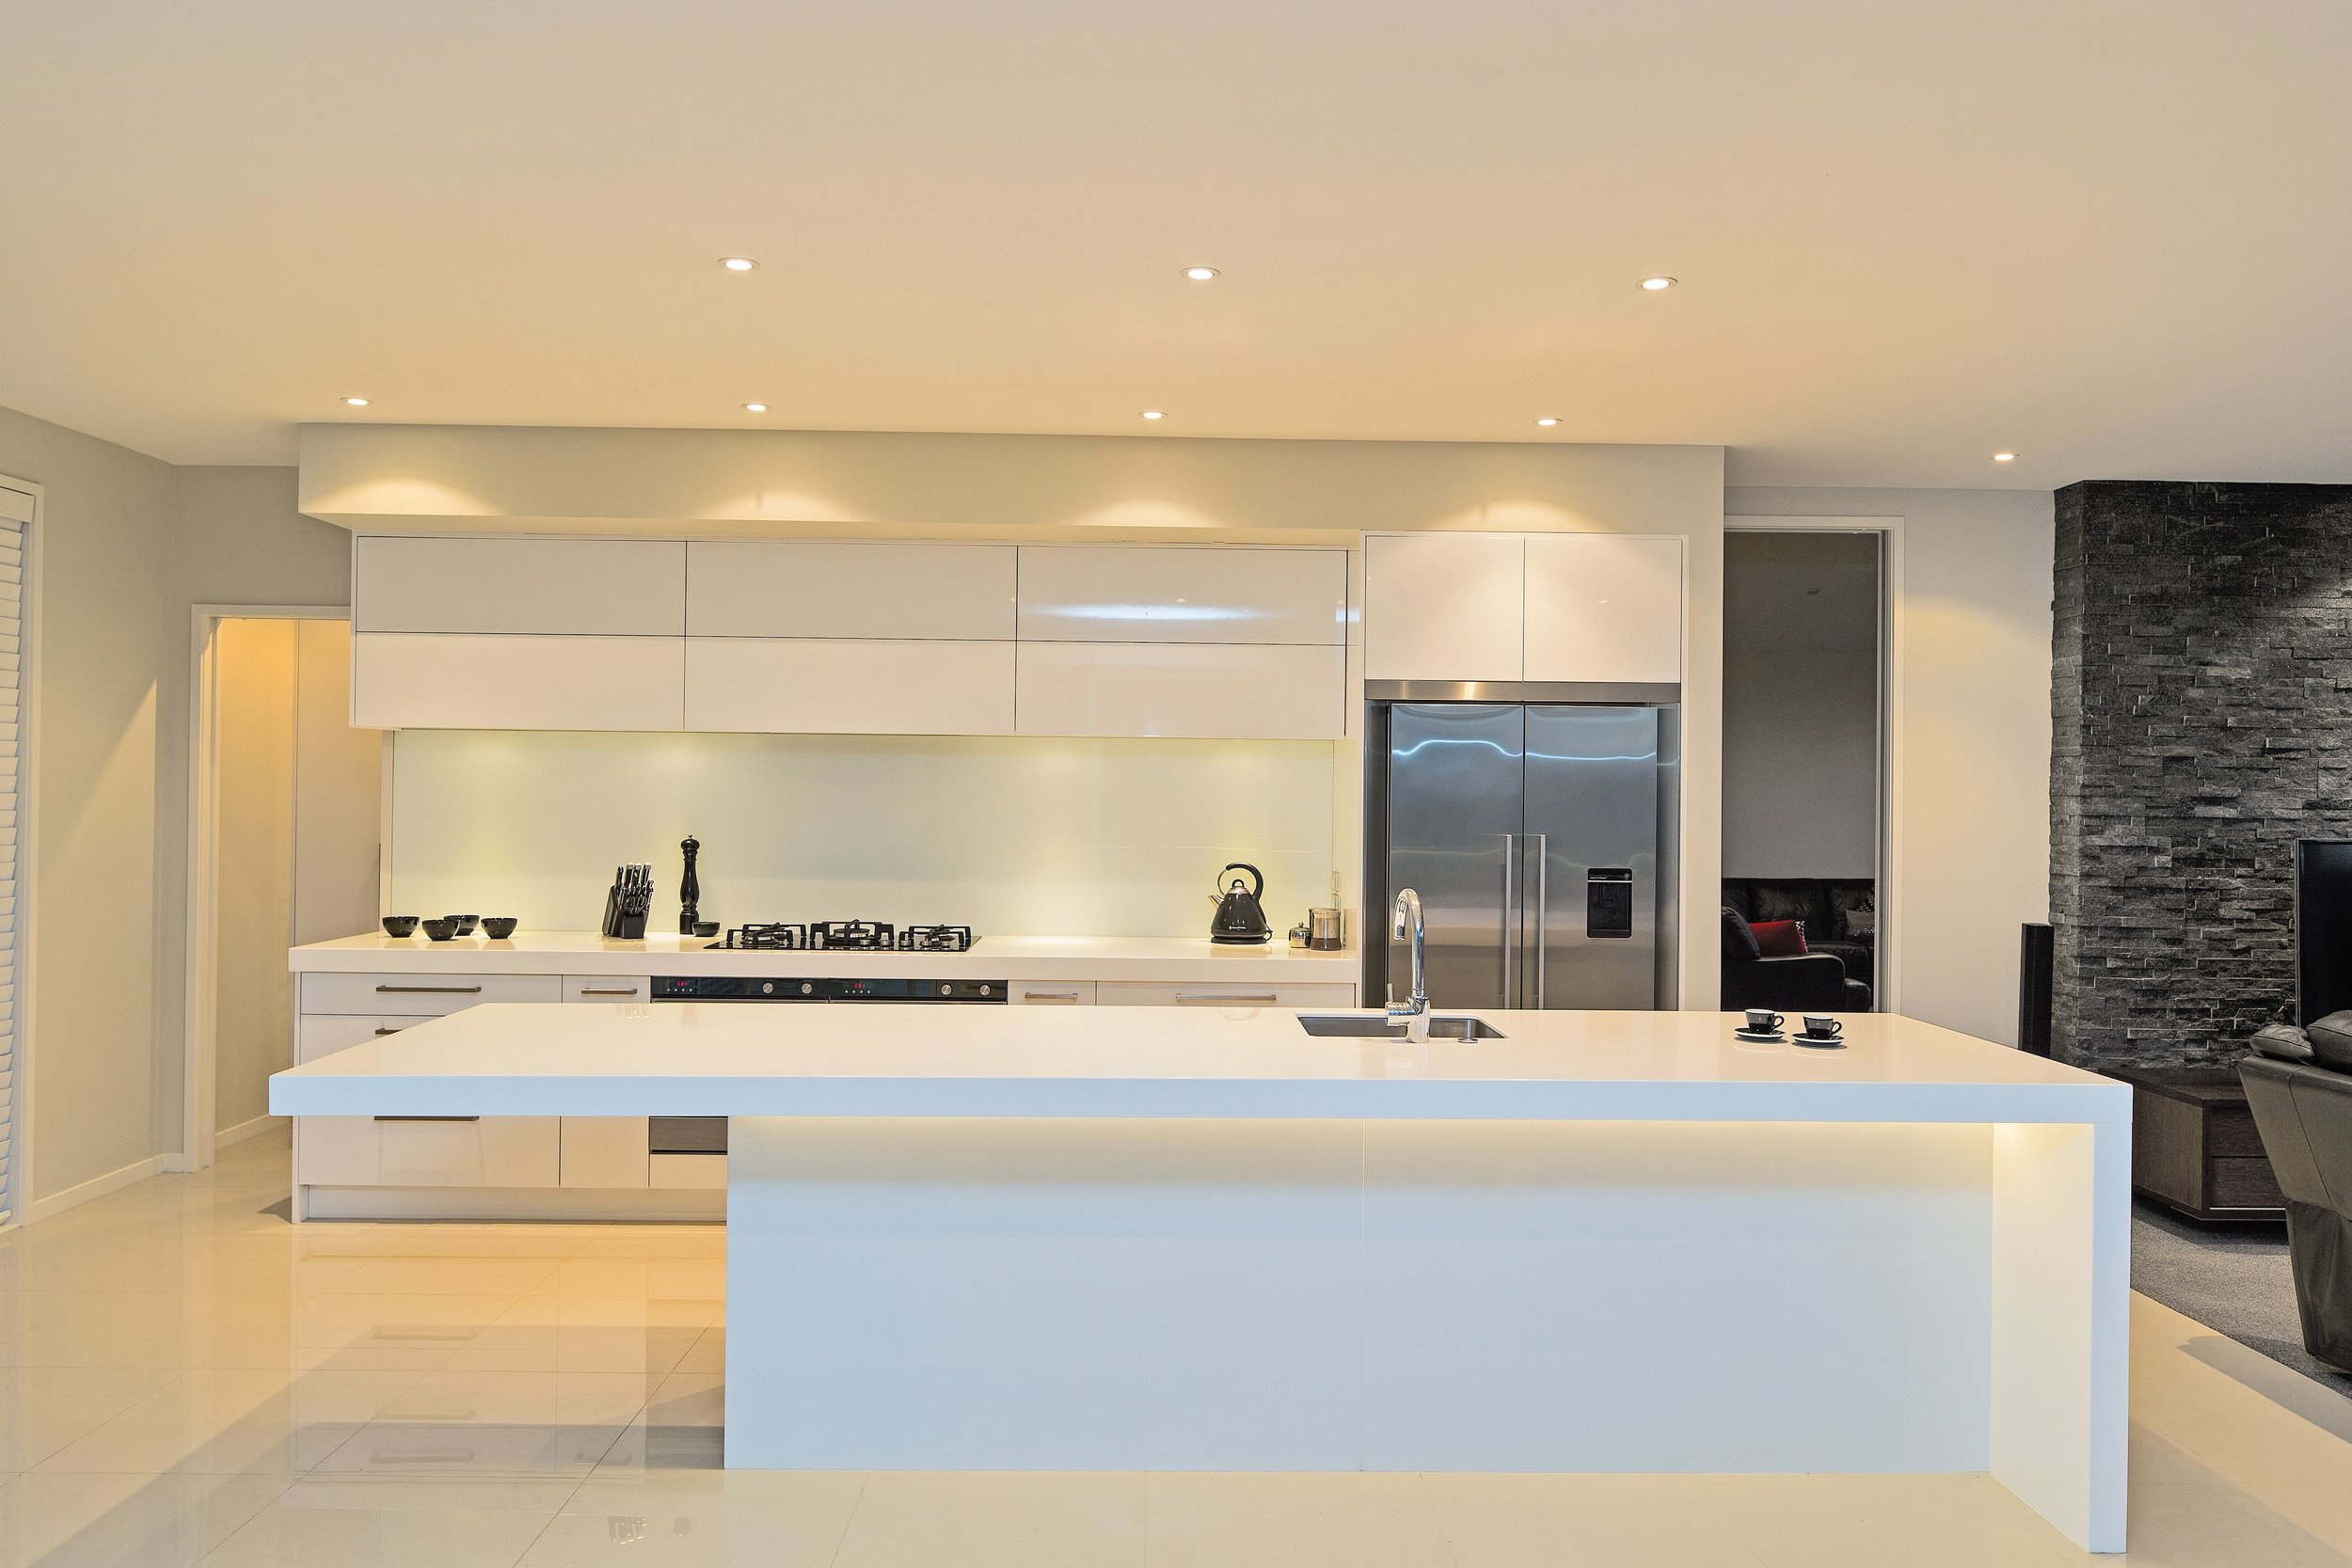 Galley kitchen with hi gloss cabinetry and off white glass splashback with shimmer